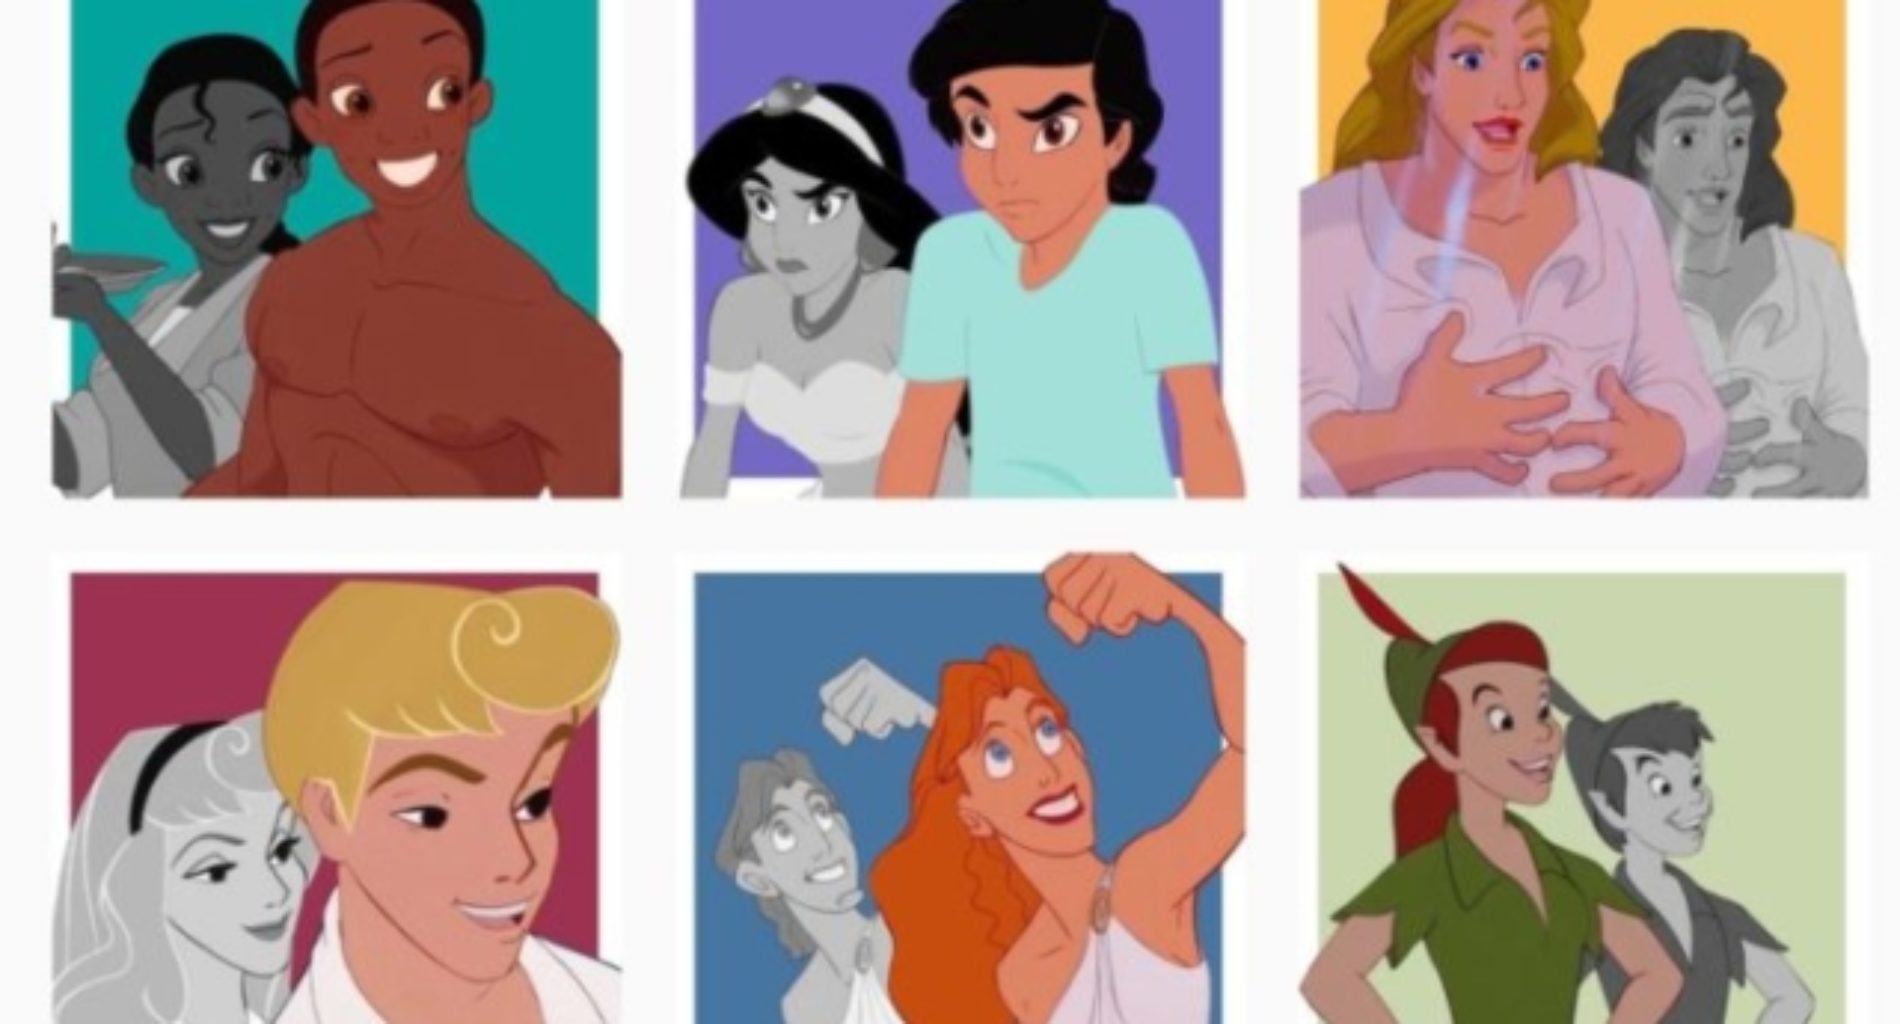 The re-imagining your favourite Disney characters as trans